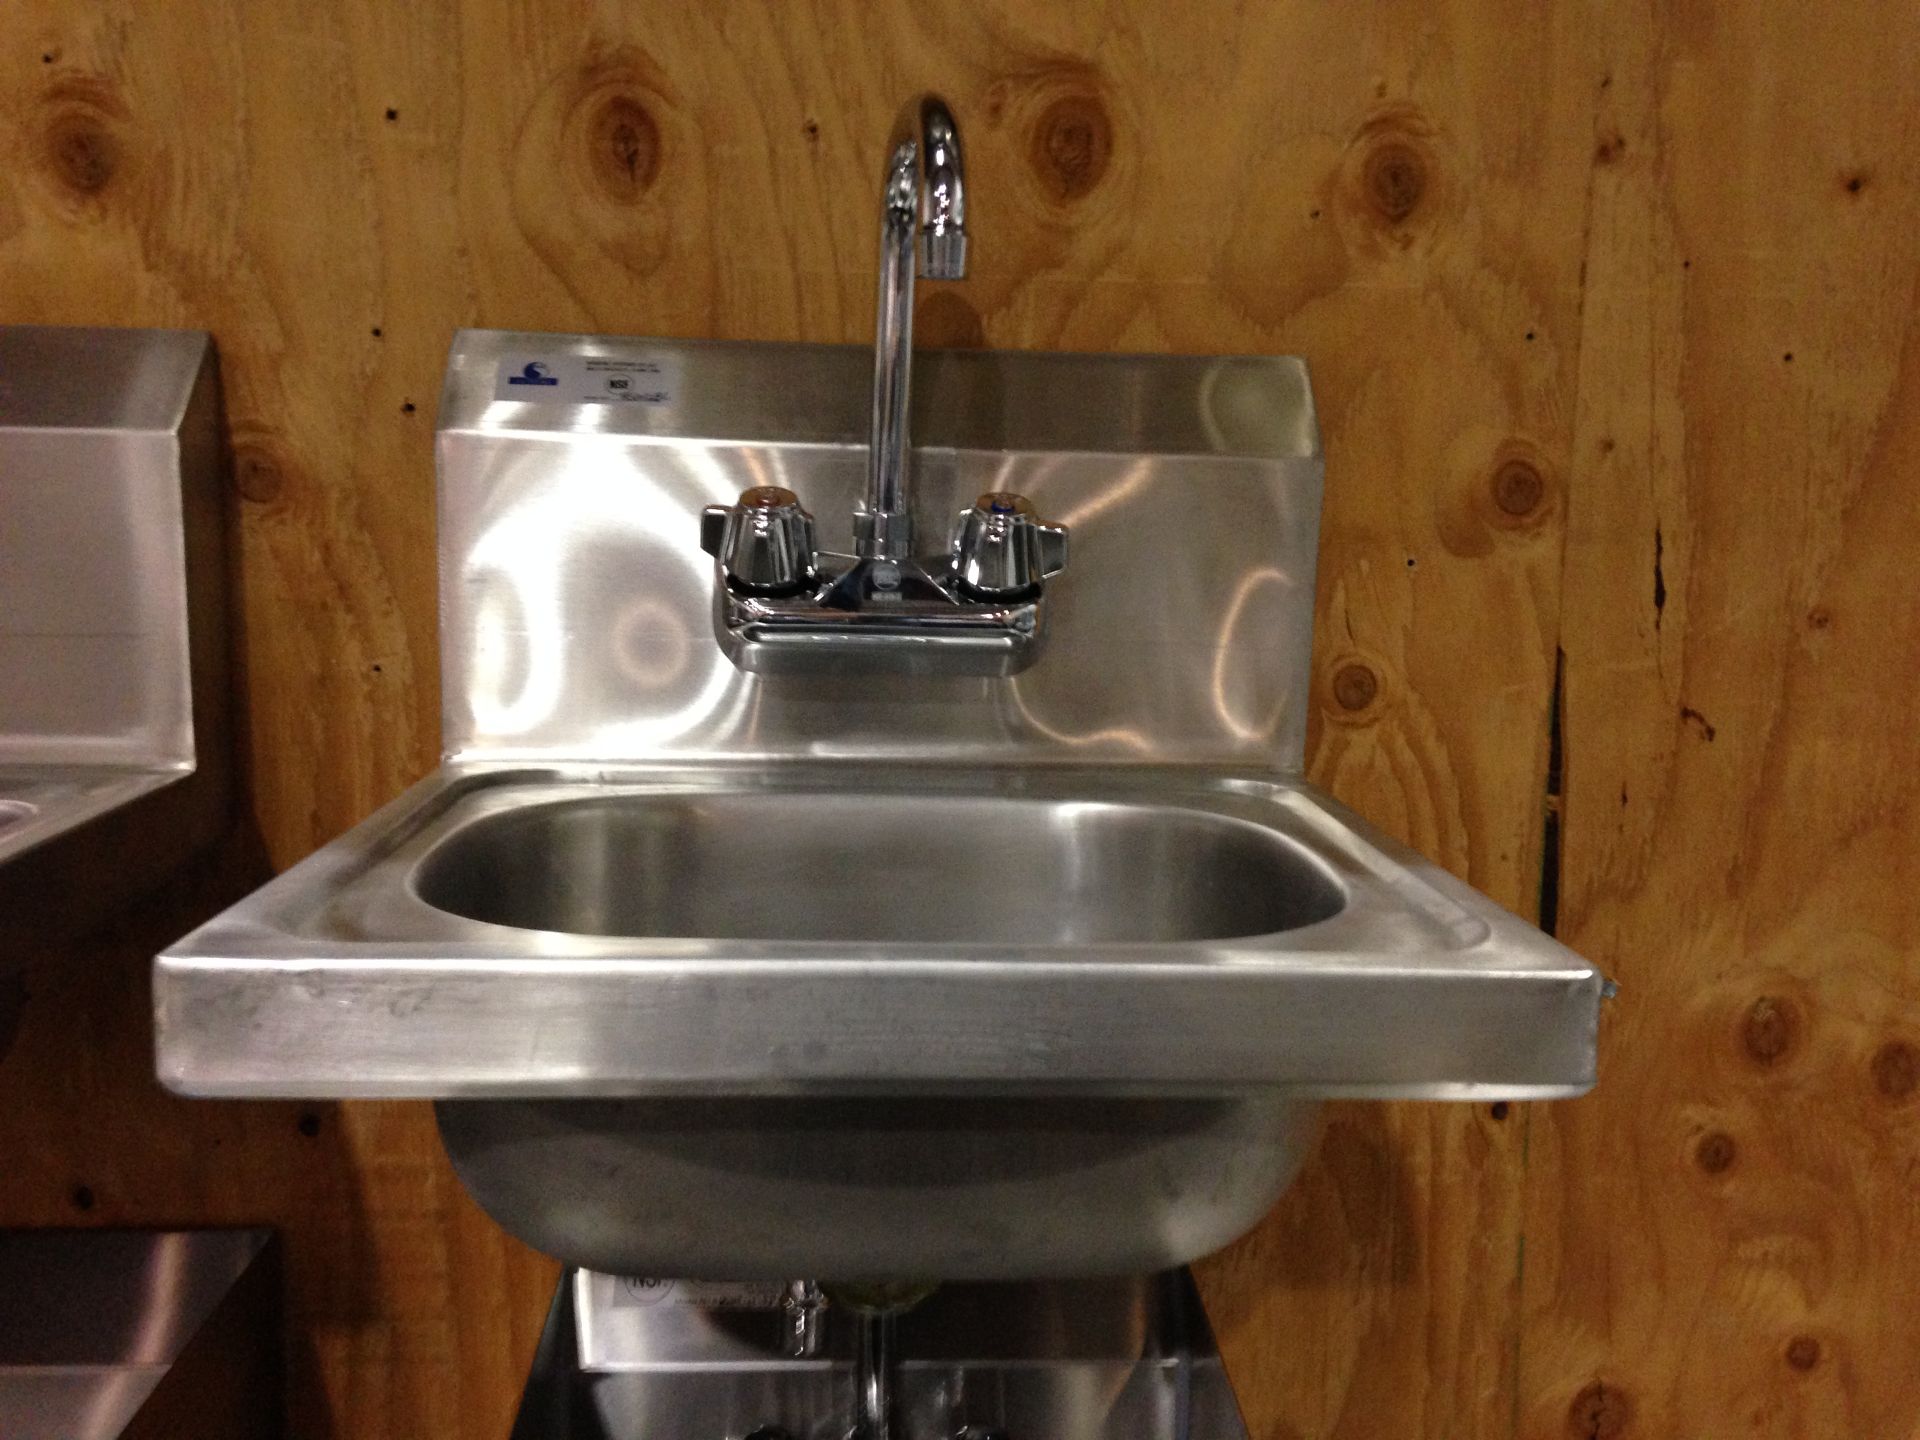 Hand Sink, Overall Dims 15"x15.75"x13", Basin Dims 12.75"x10"x5"